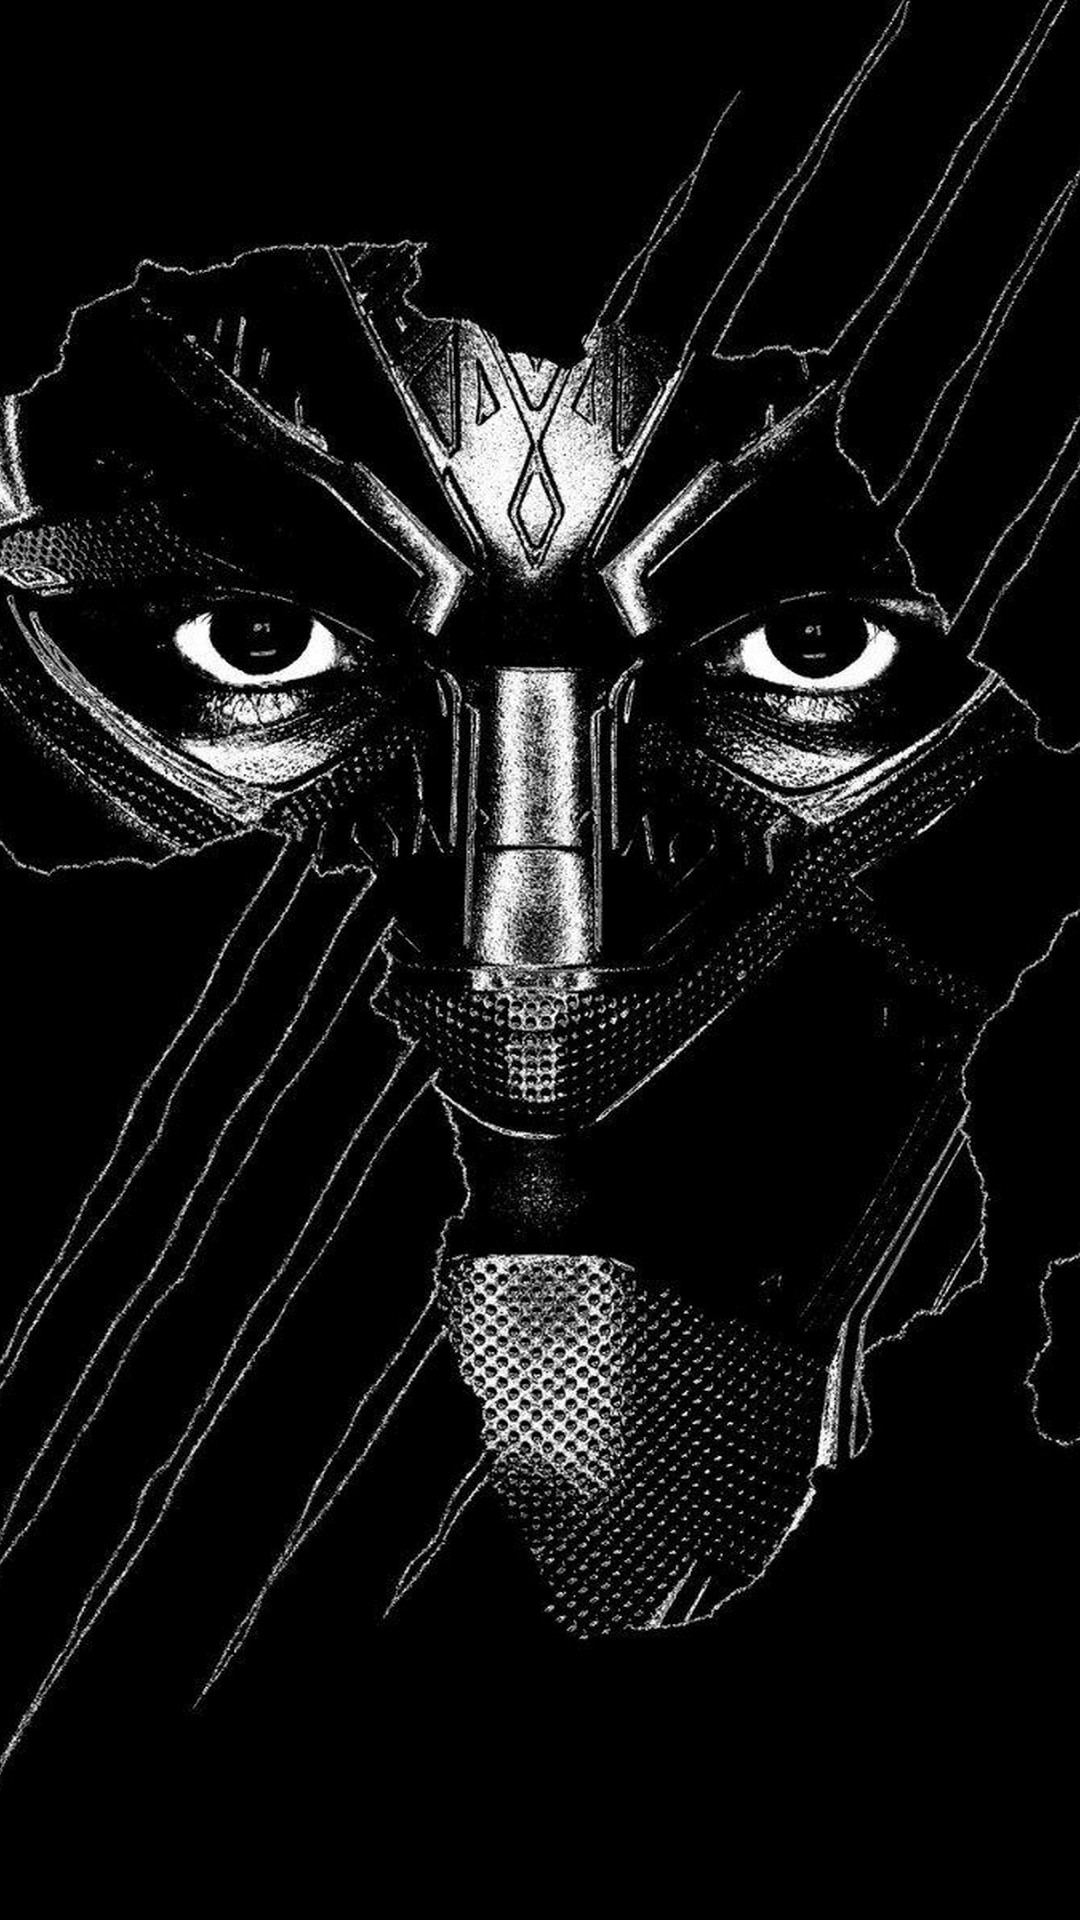 Black Panther Superhero iPhone 6 Wallpaper with high-resolution 1080x1920 pixel. You can use this poster wallpaper for your Desktop Computers, Mac Screensavers, Windows Backgrounds, iPhone Wallpapers, Tablet or Android Lock screen and another Mobile device